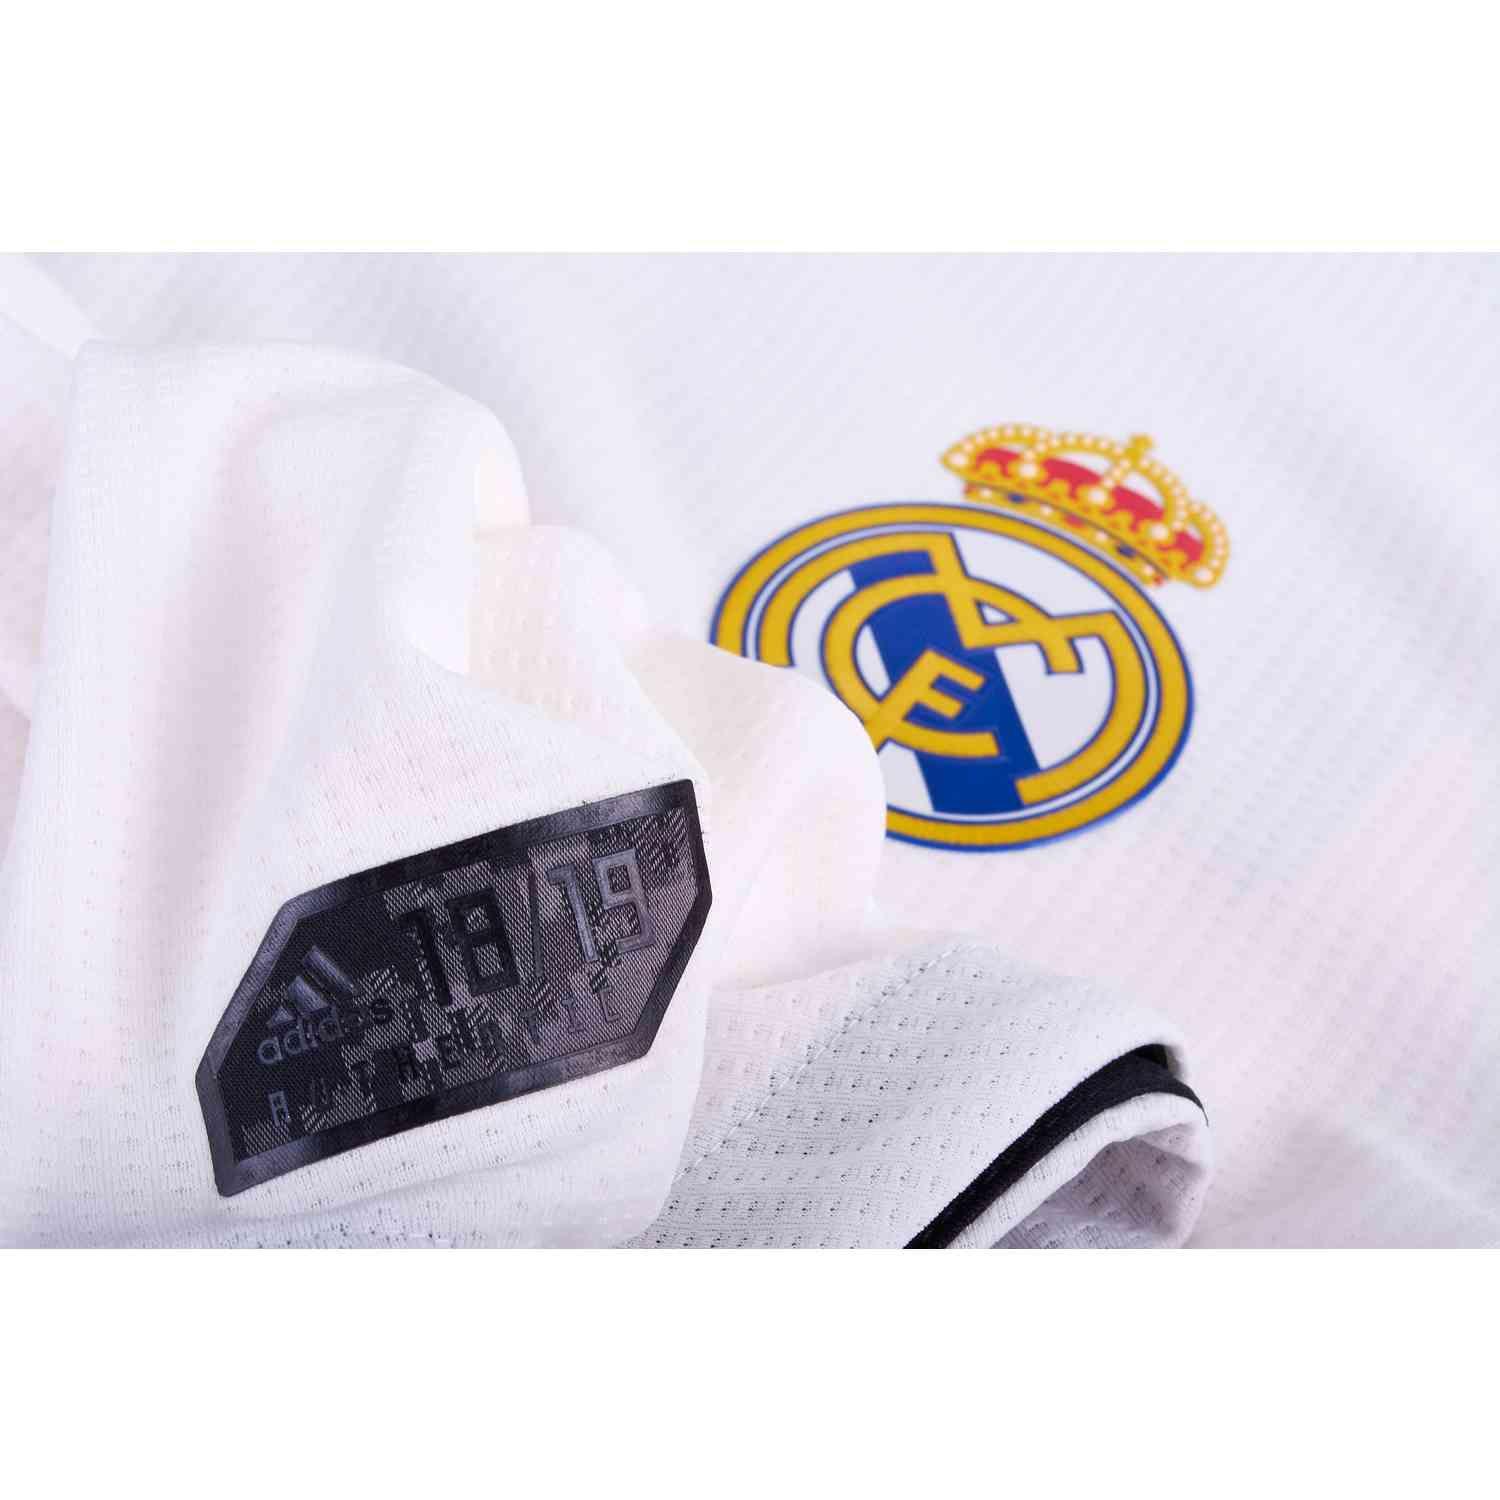 Adidas Real Madrid Logo - adidas Real Madrid Home Authentic L/S Jersey 2018-19 - SoccerPro